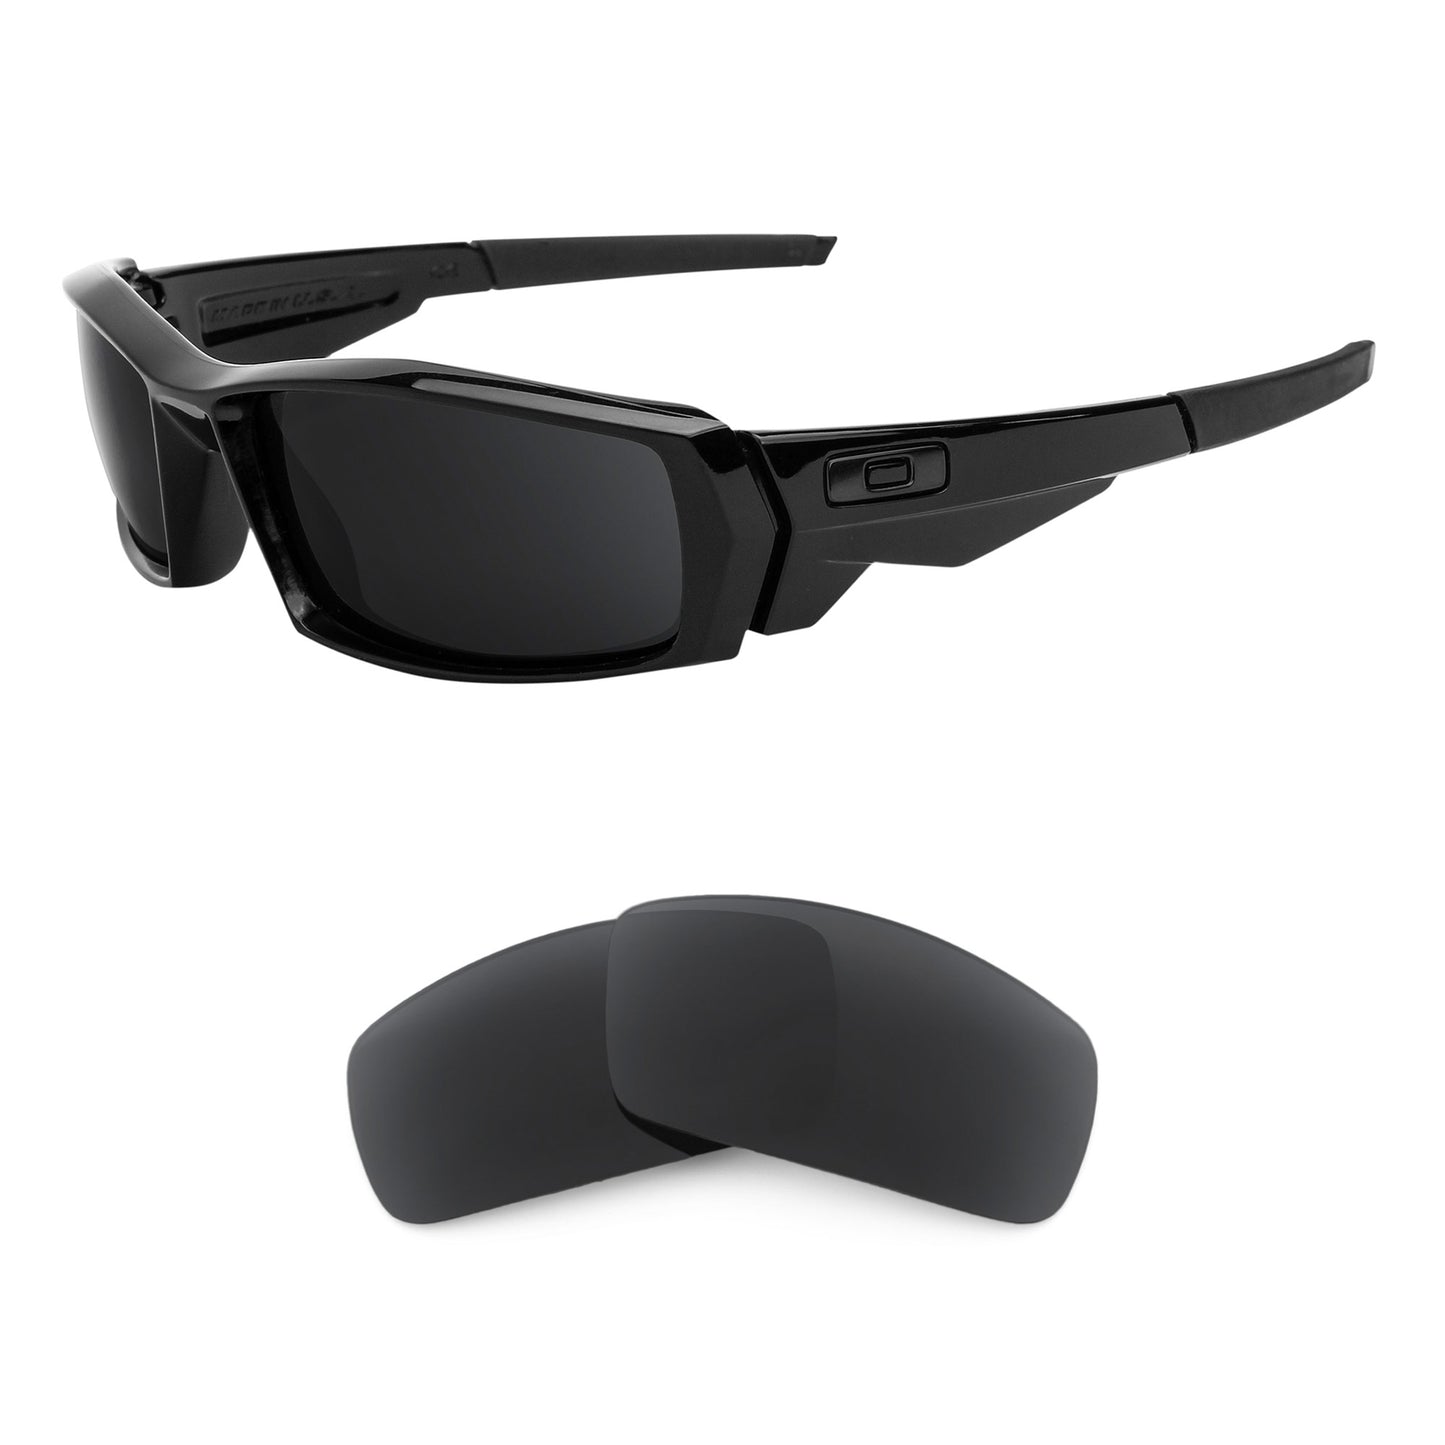 Oakley Canteen (2006) sunglasses with replacement lenses